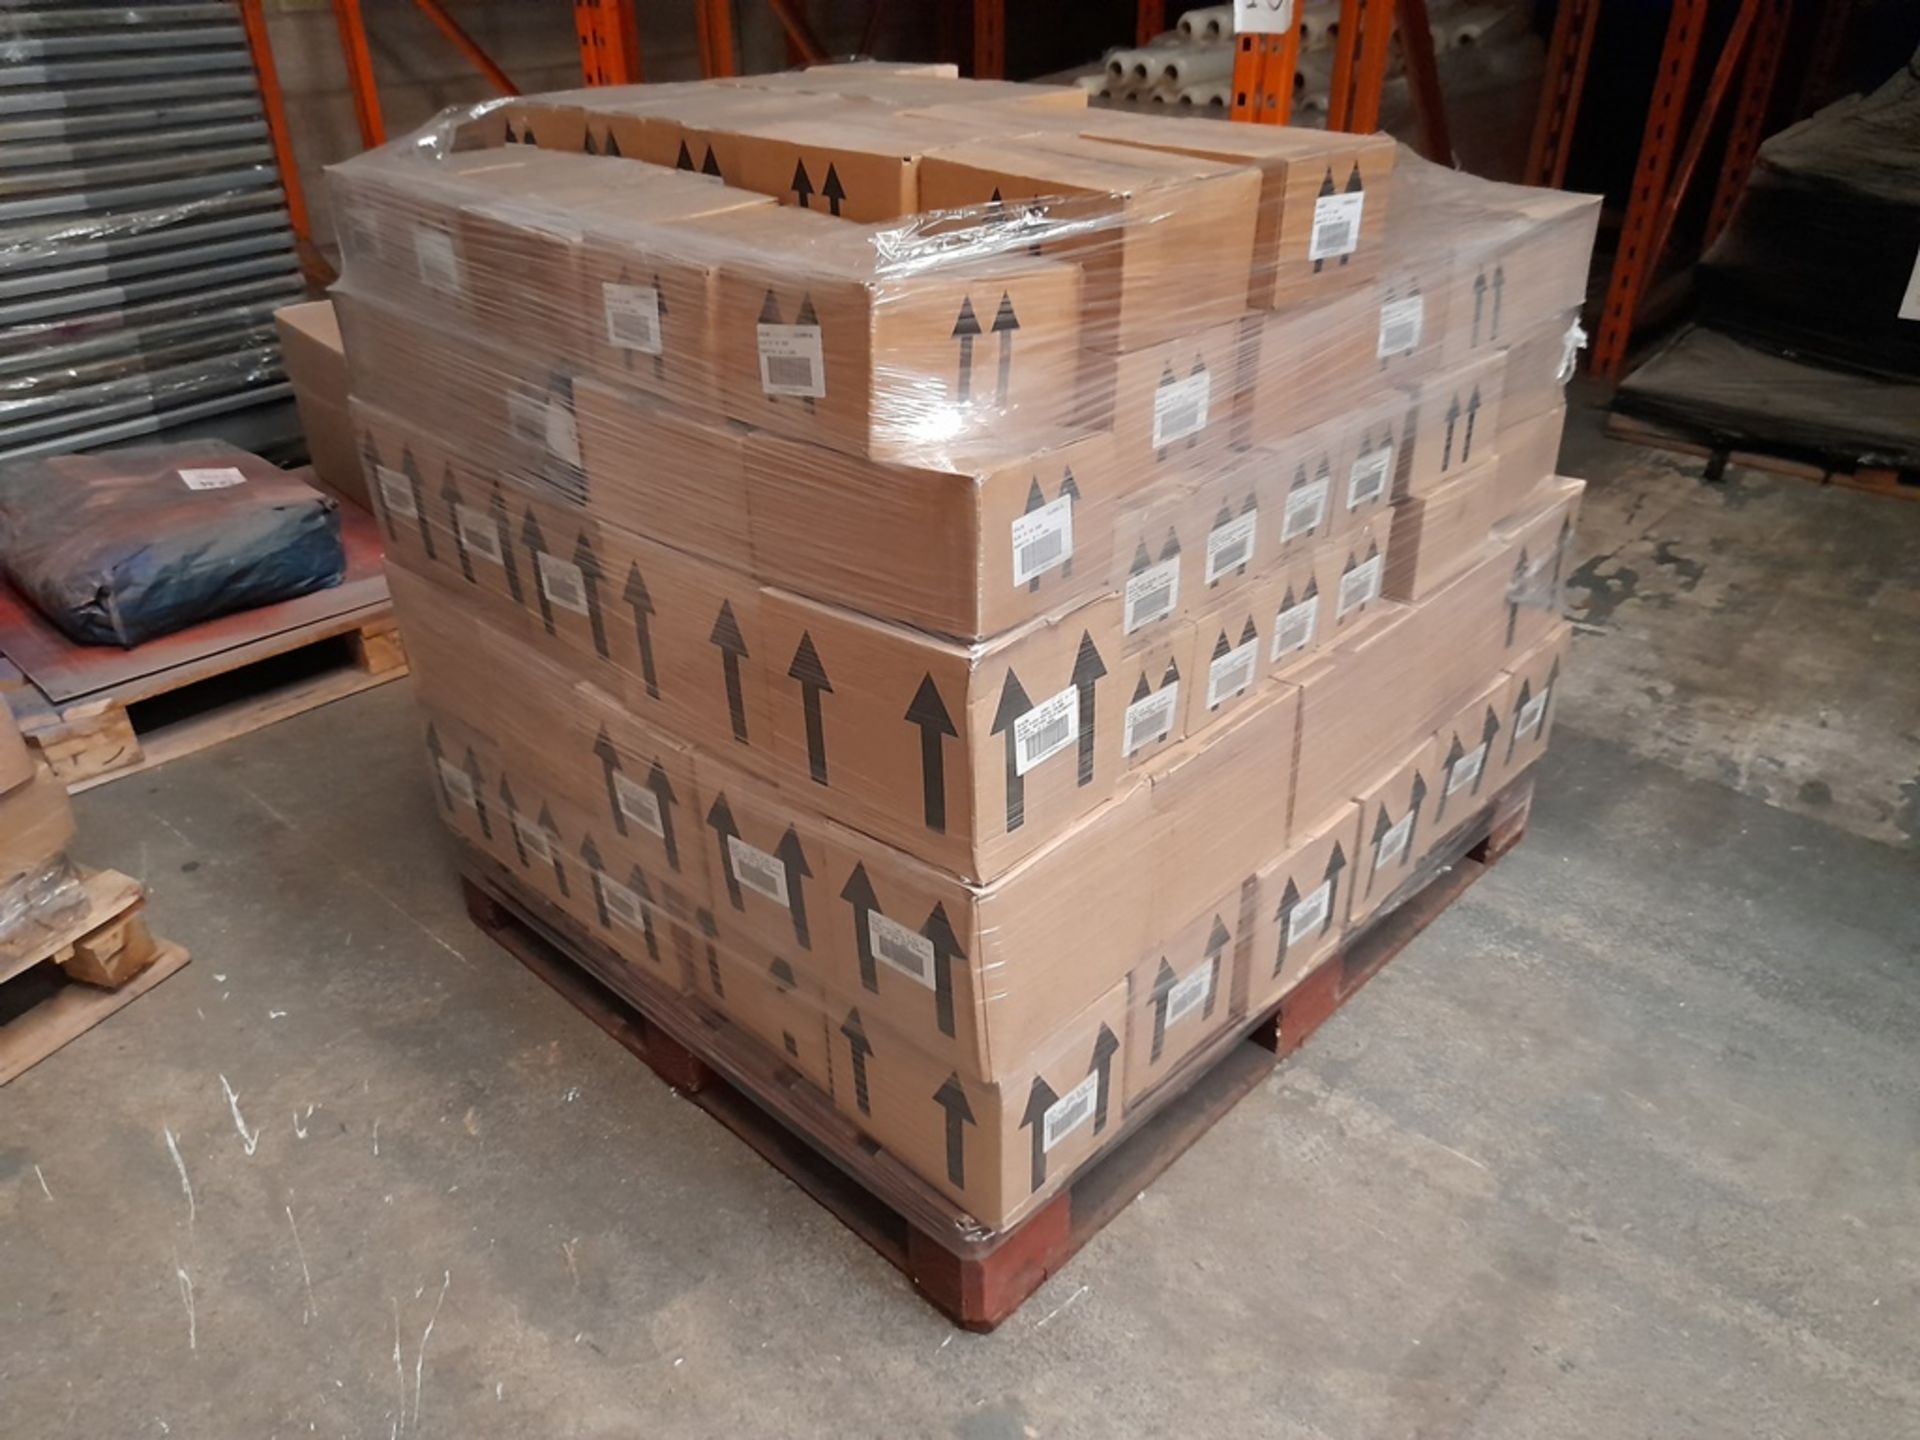 1 Pallet of Ocaldo mixed paint including glow in the dark paint, Ready Mix paint - bronze, lilac, - Image 7 of 7